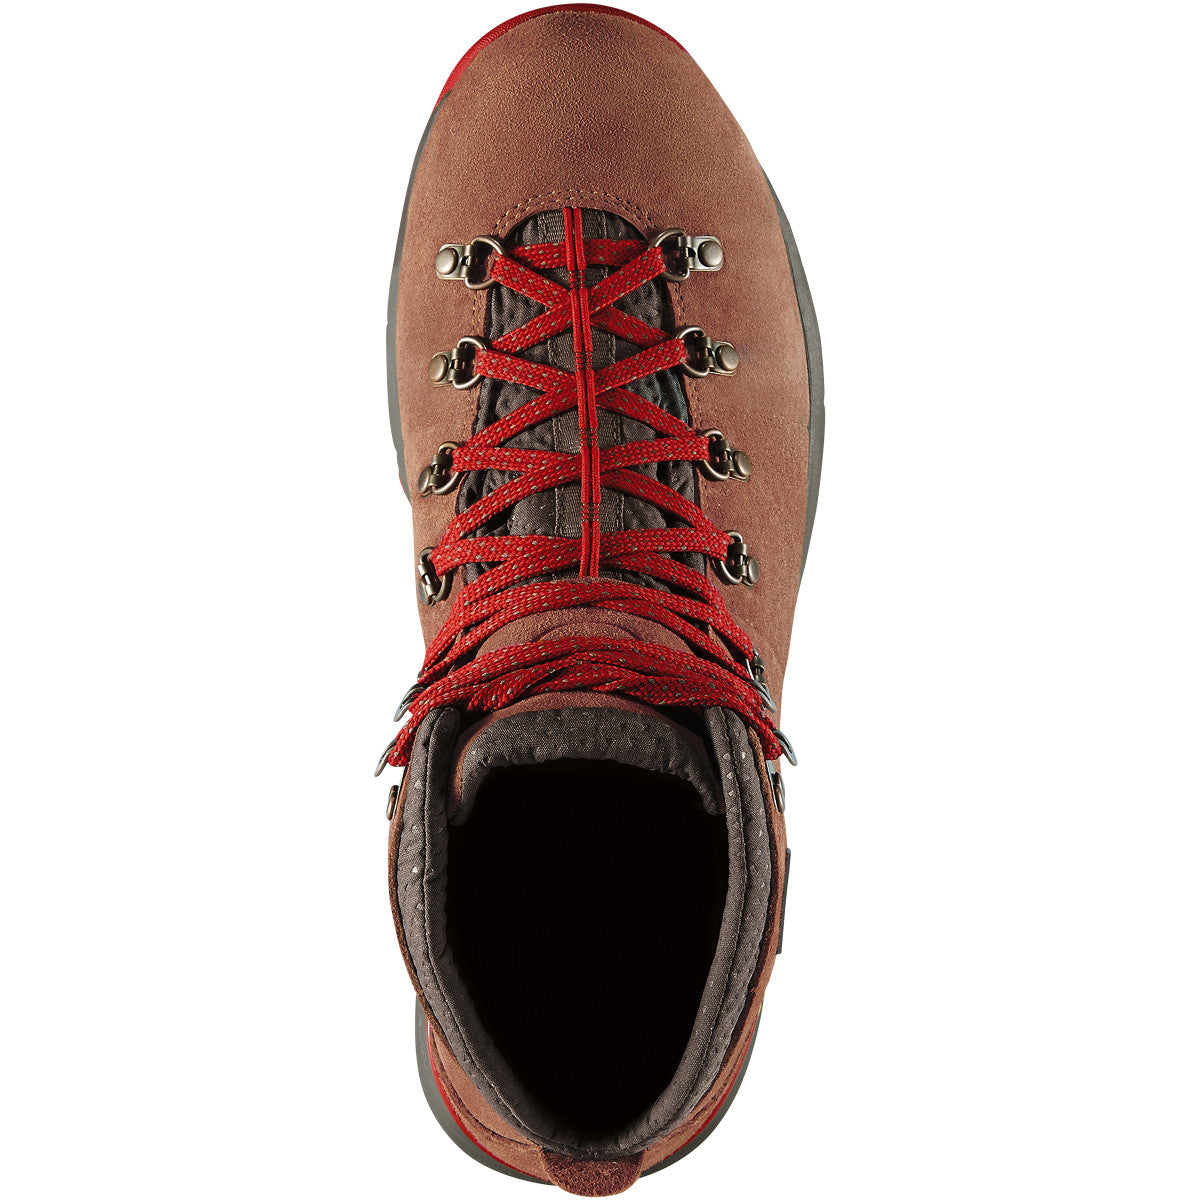 Danner Mountain 600 Mid Hiking Shoes